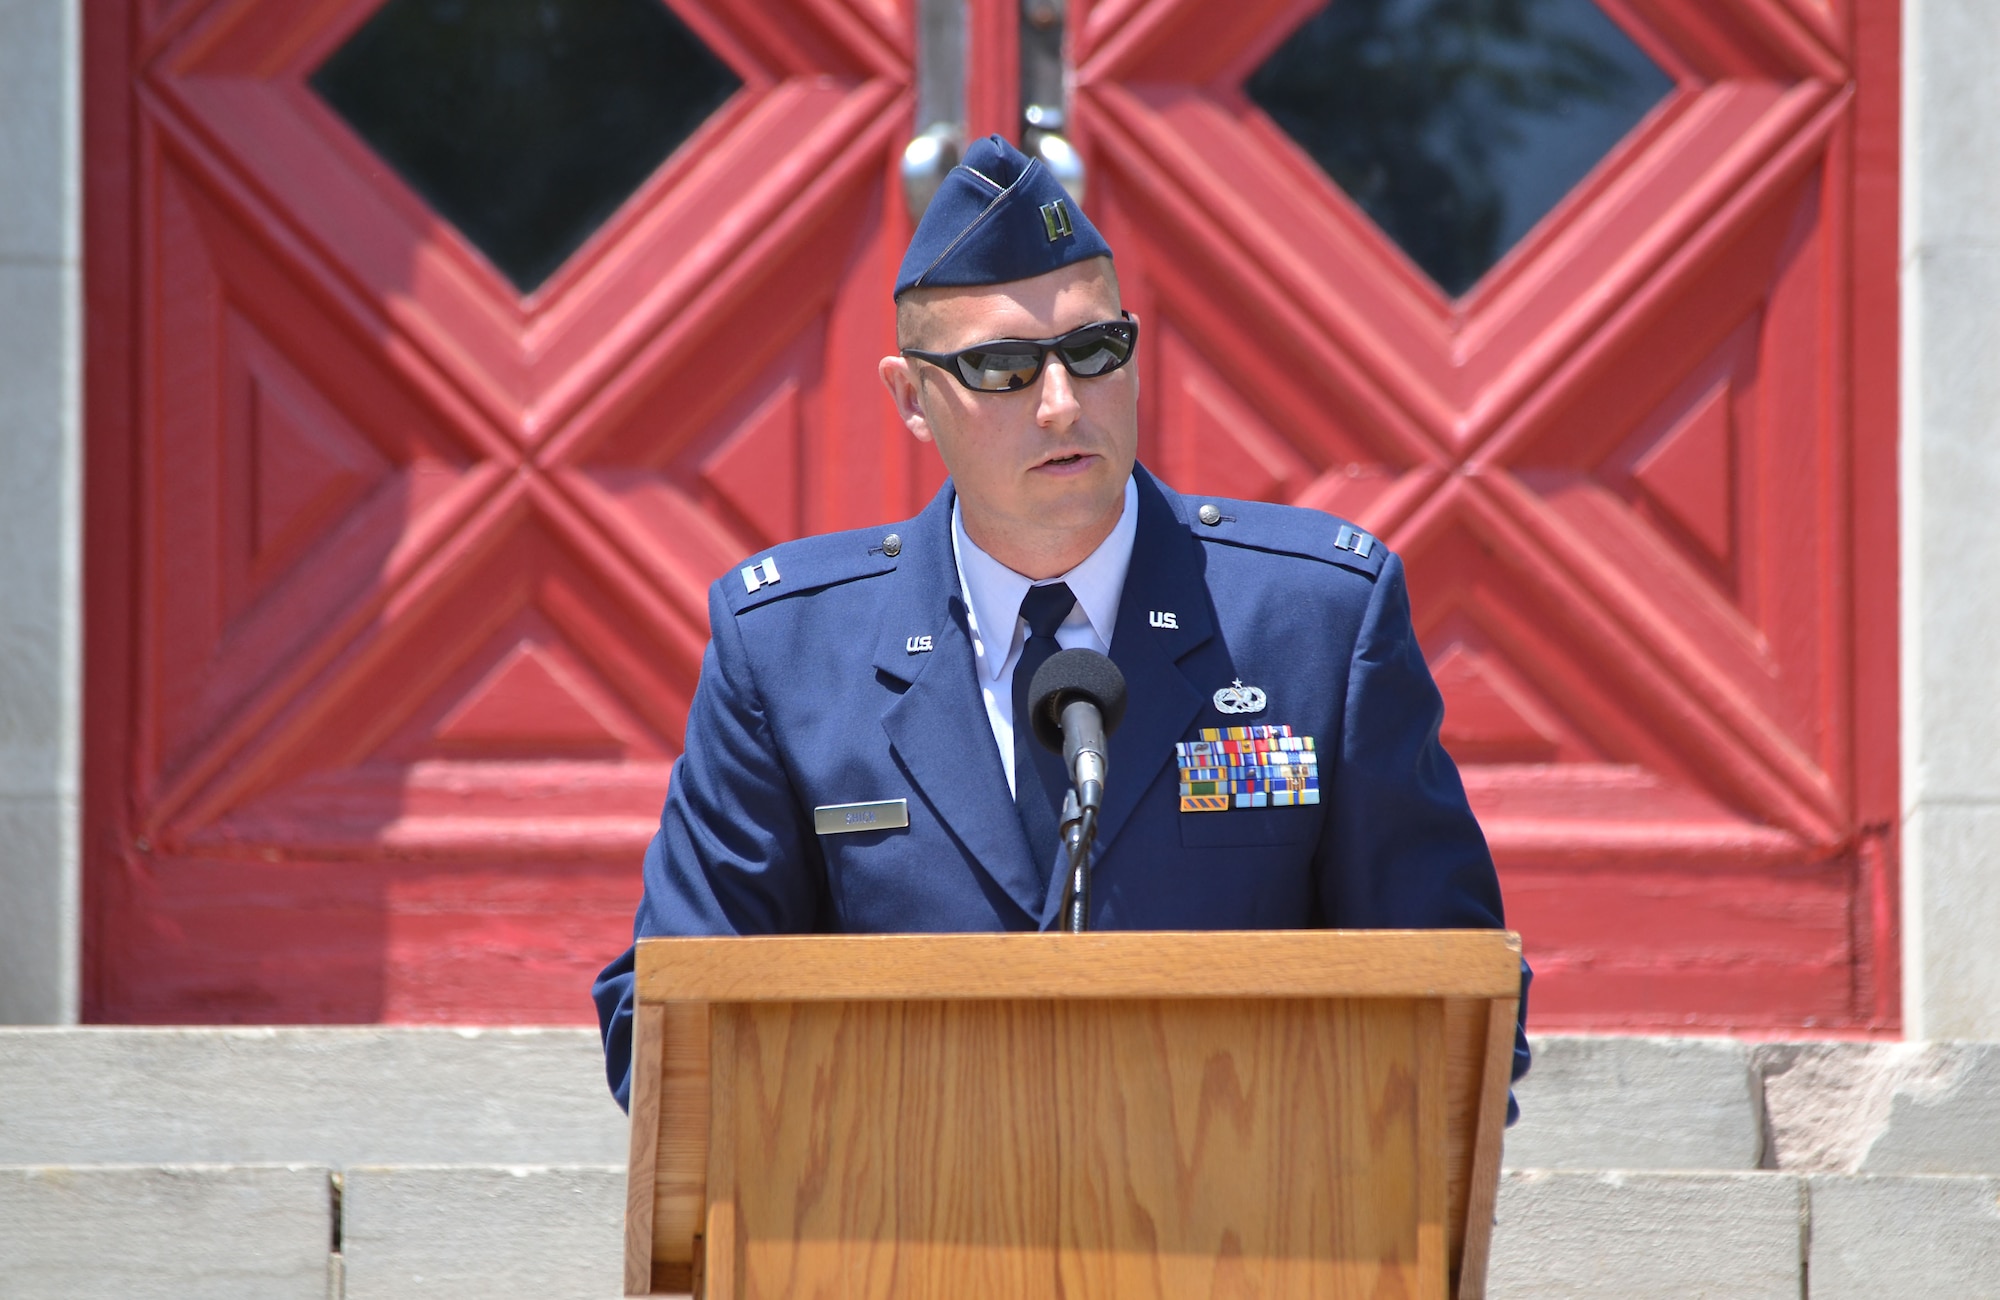 Capt. Aaron Shick, 111th Attack Wing Air Operations Group logistics readiness officer, Horsham Air Guard Station, Pennsylvania, closed the 55th Annual Avenues of Flags ceremony in Whitemarsh Memorial Park, Ambler, Pennsylvania on May 25, 2015. The event hosted hundreds of locals and residents.(U.S. Air National Guard photo by Master Sgt. Christopher Botzum/Released)